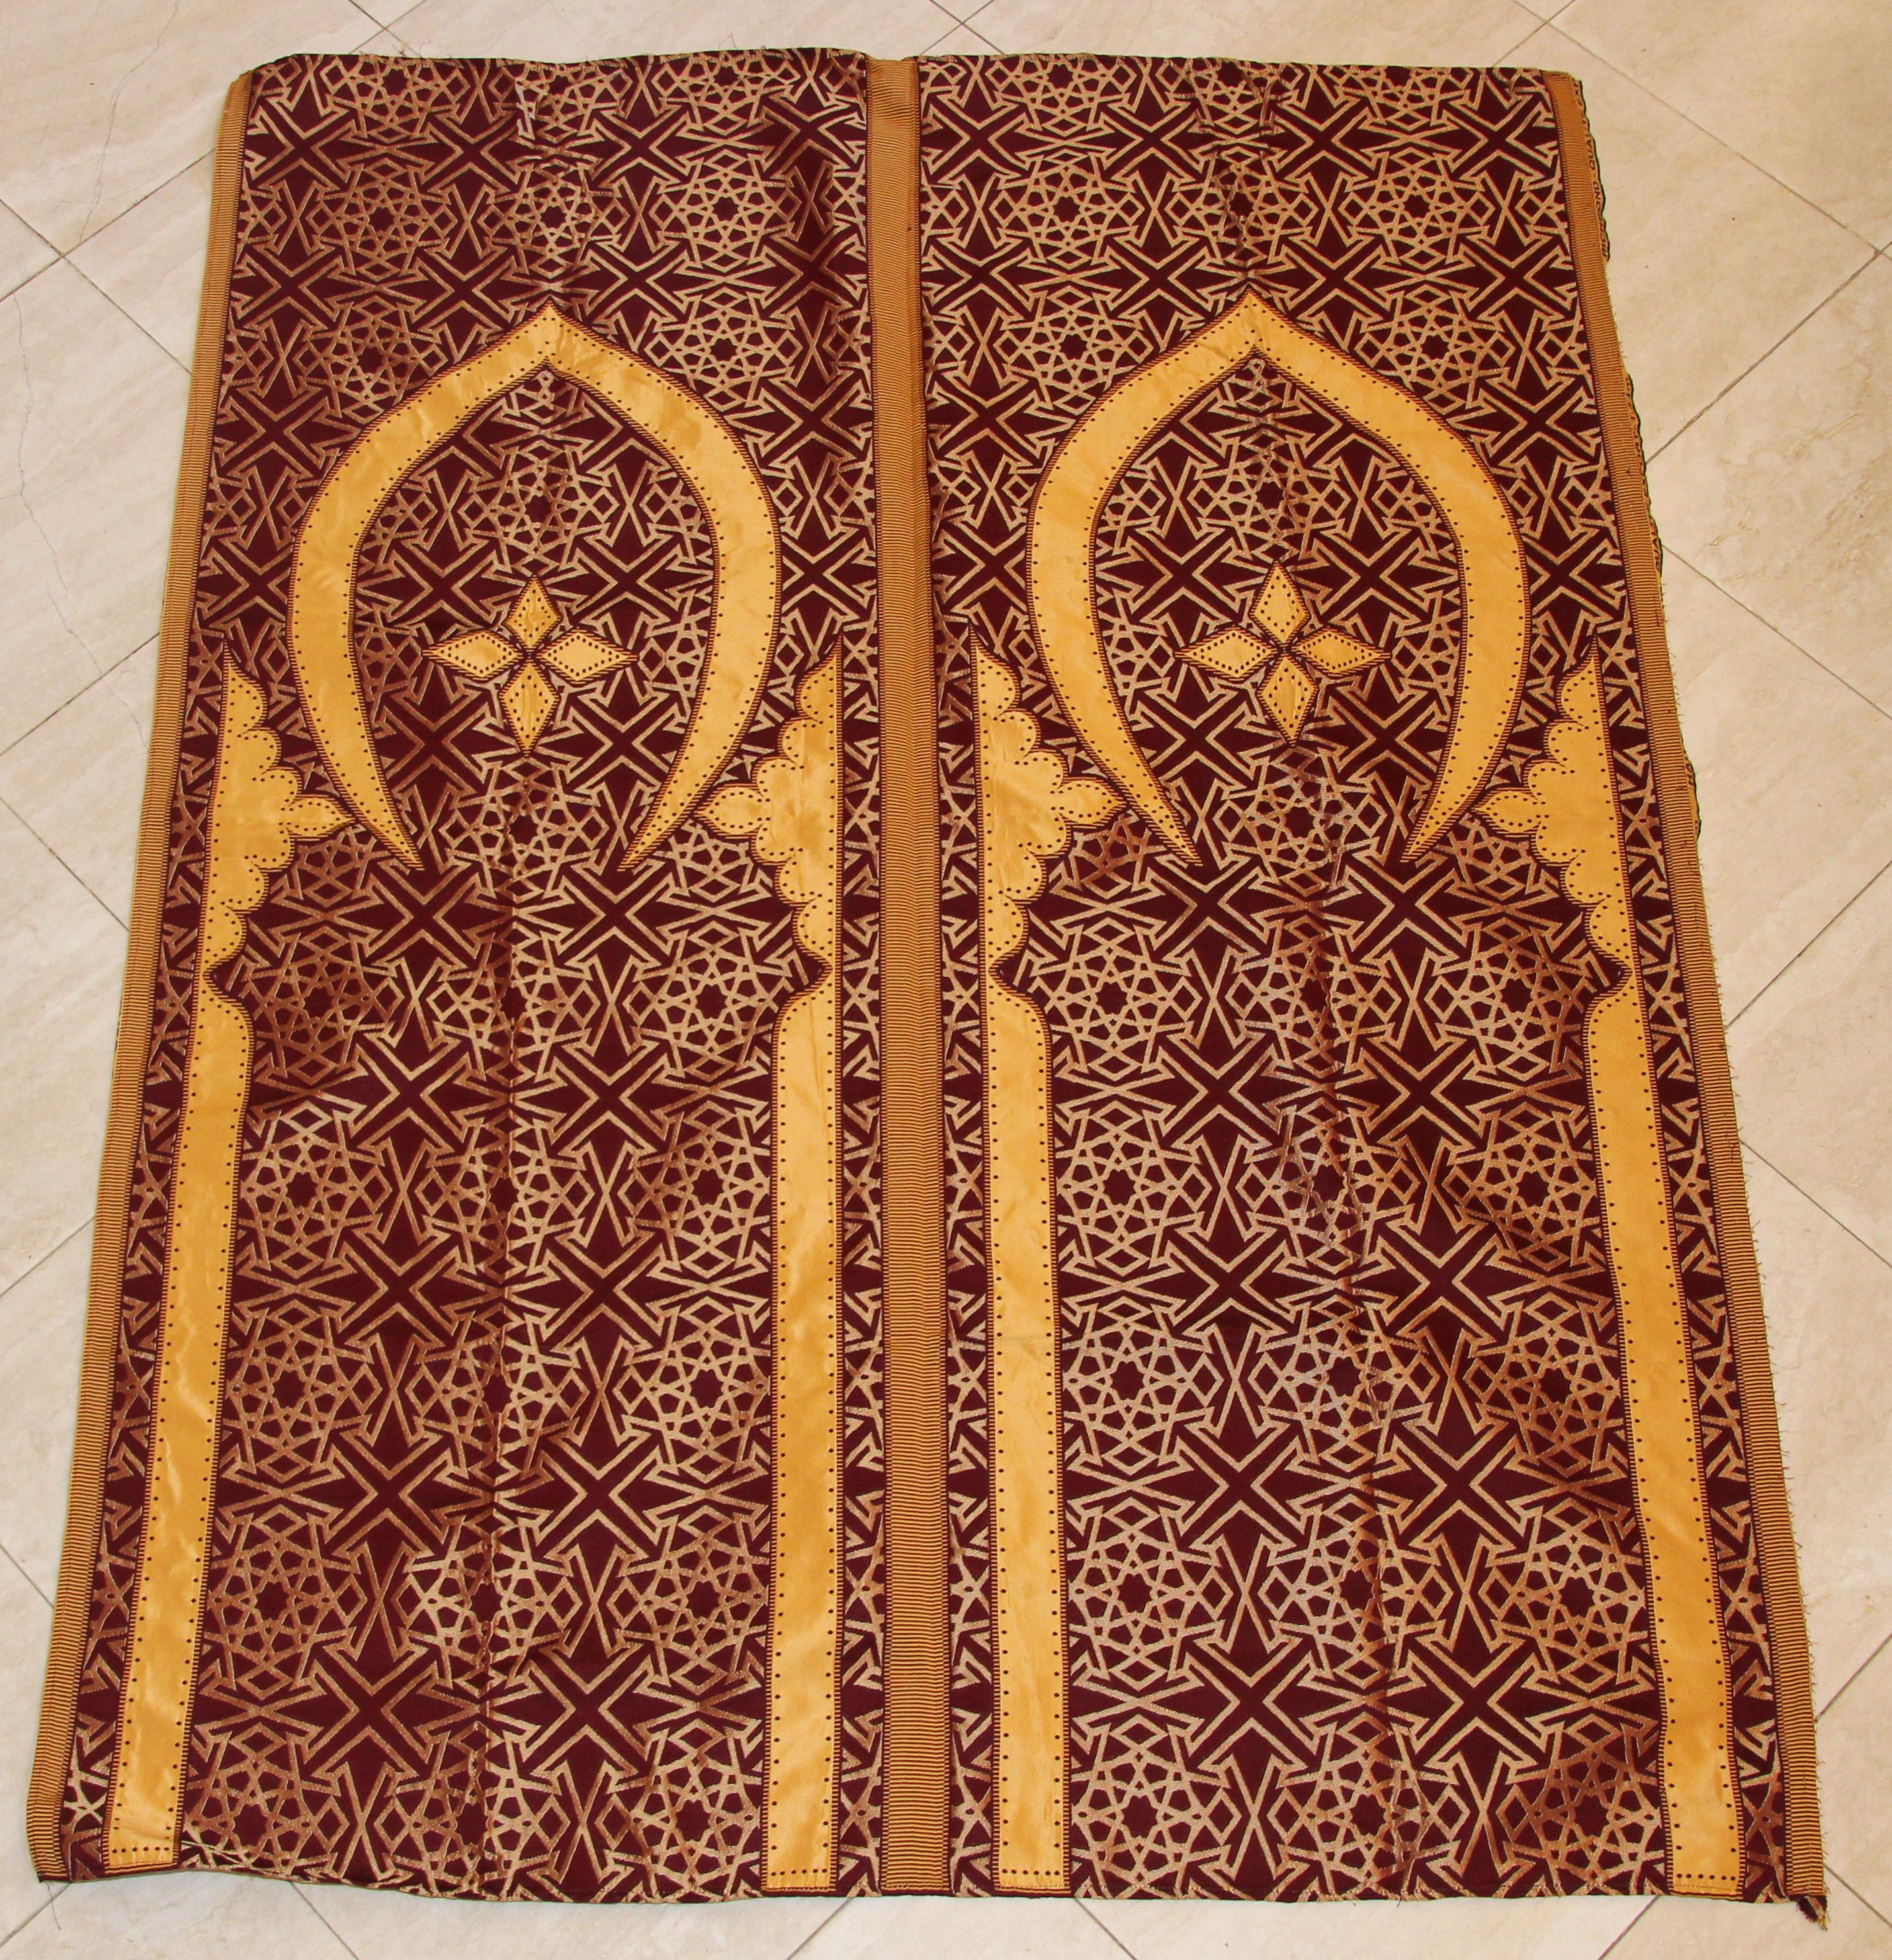 Moroccan wall hanging, hiti with red and gold moorish arches.
Moroccan vintage textile in gold and red, could be used both sides.
Great Moorish traditional geometric Fez design with arches.
Ideal to frame it or to use it as a wall hanging.
Hiti